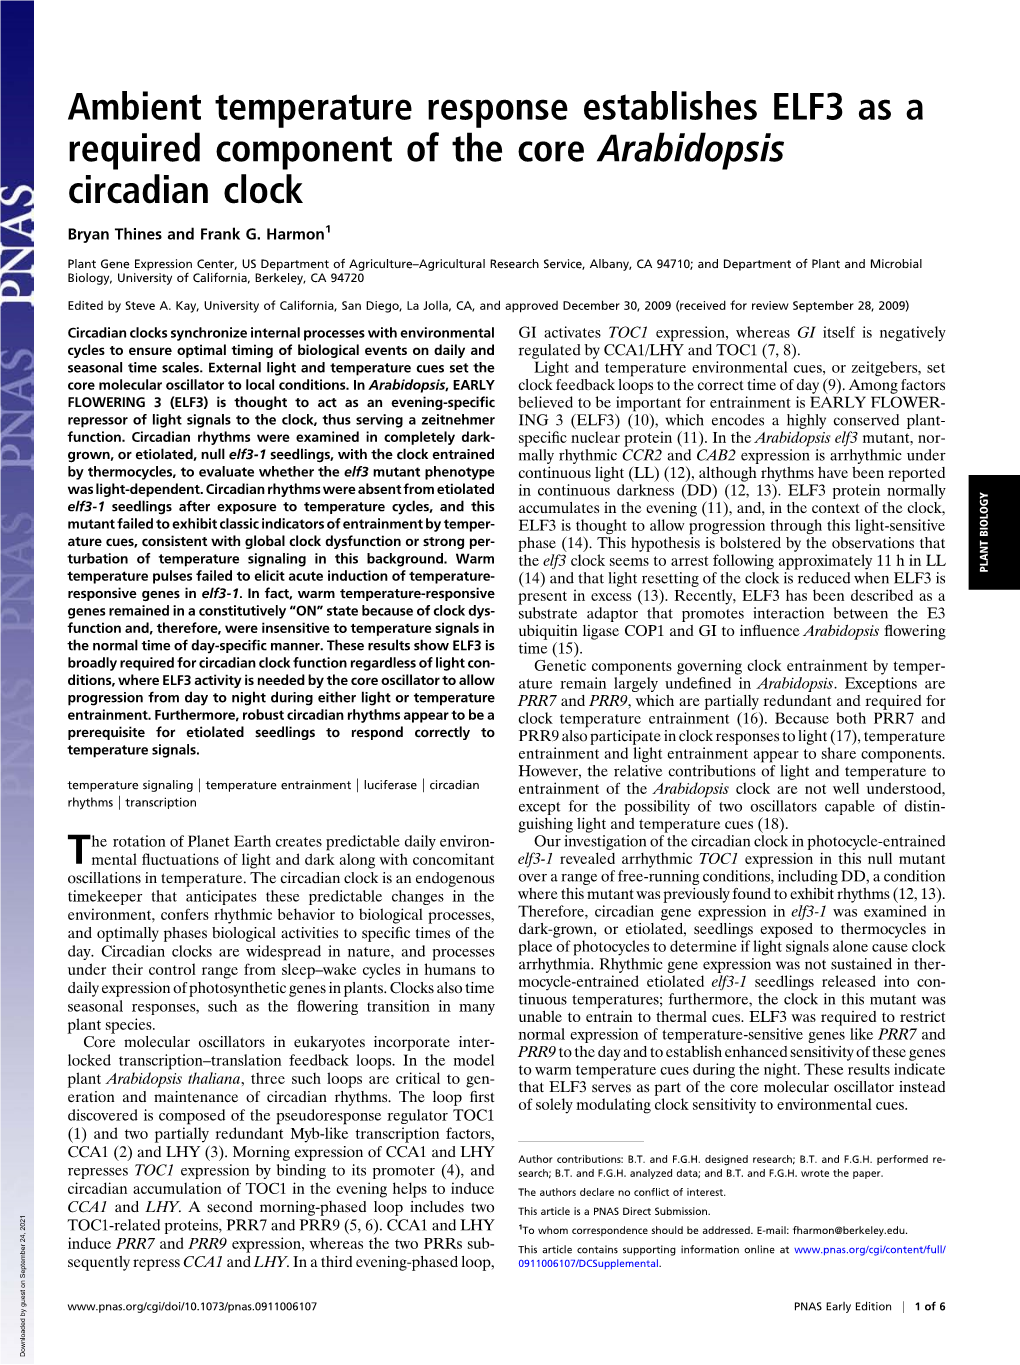 Ambient Temperature Response Establishes ELF3 As a Required Component of the Core Arabidopsis Circadian Clock